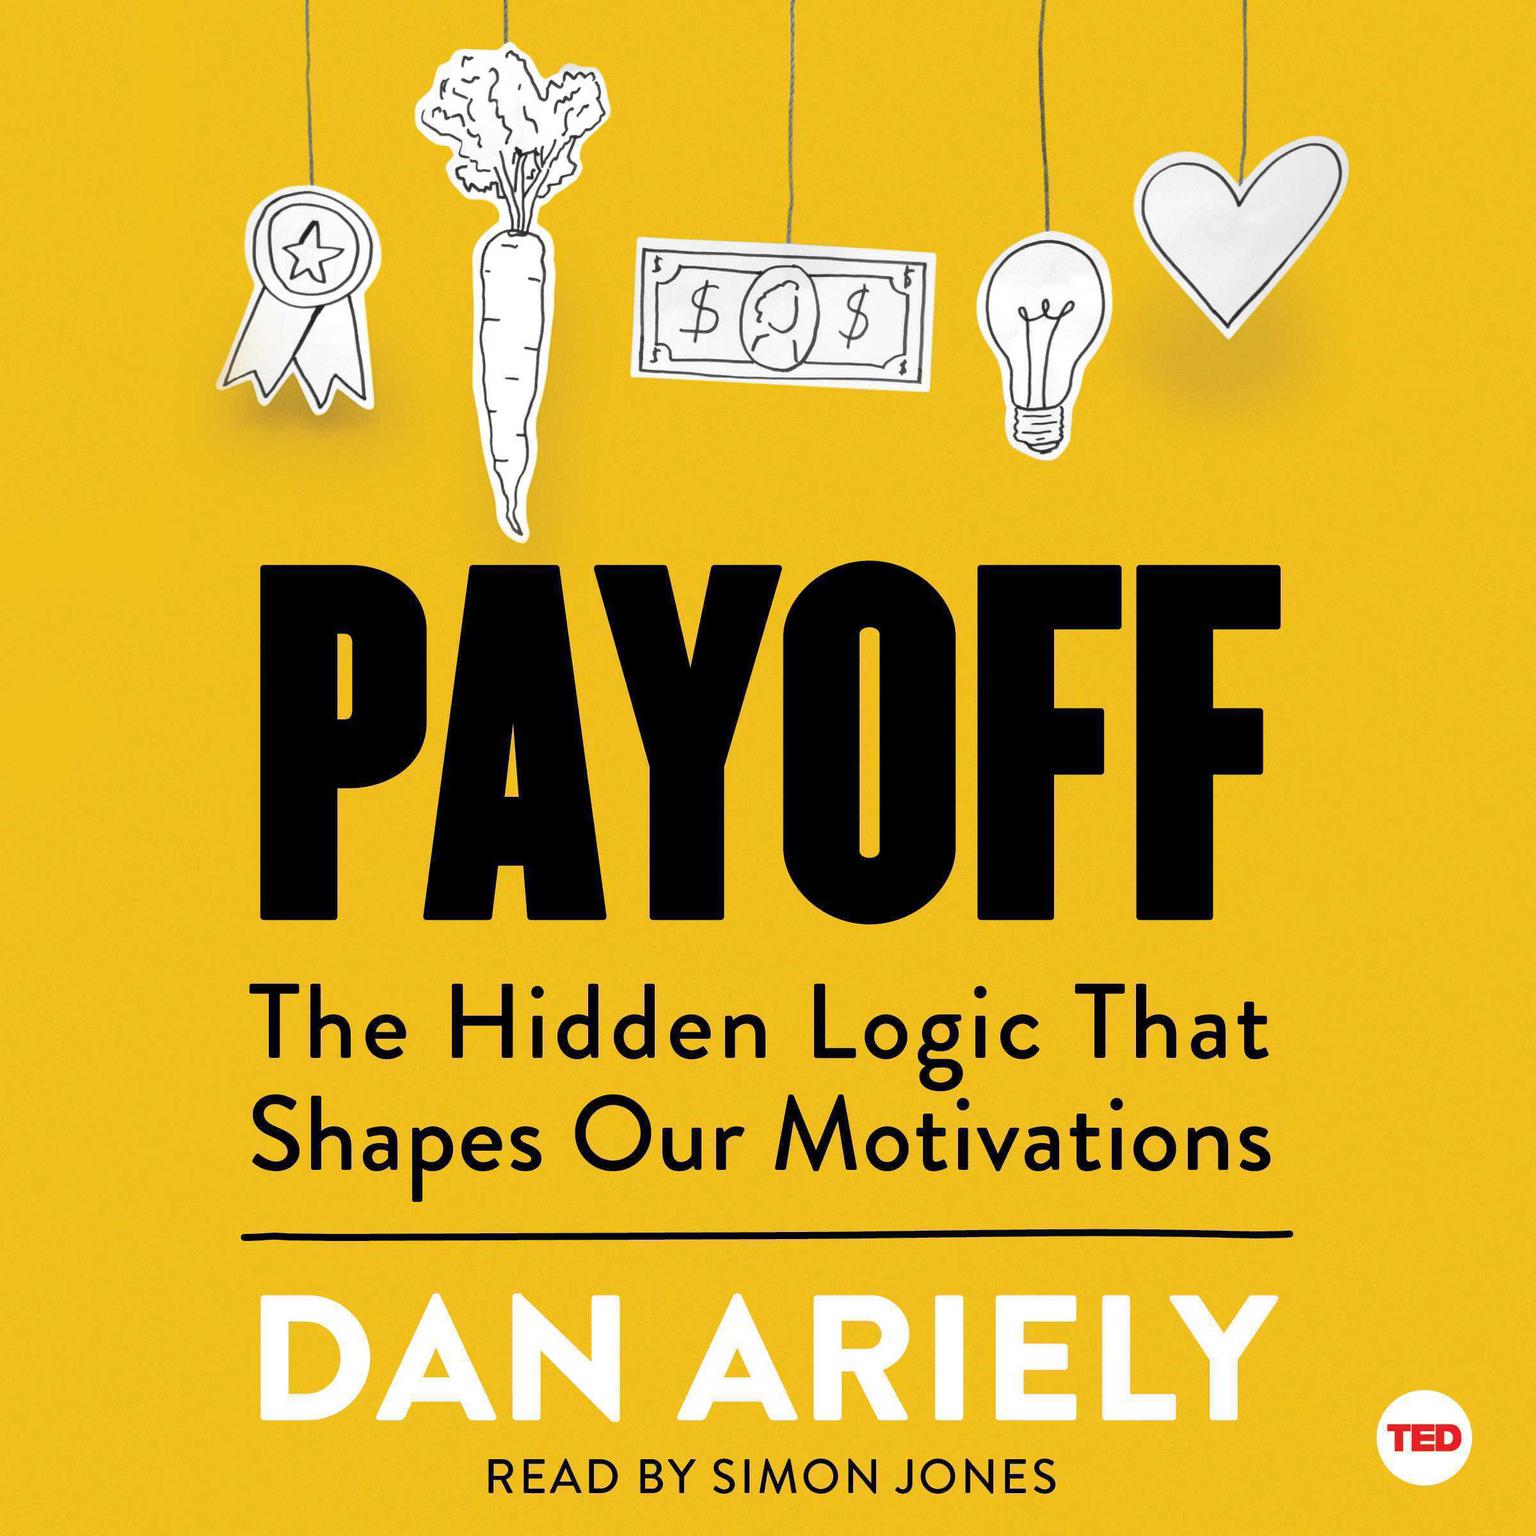 Payoff: The Hidden Logic That Shapes Our Motivations Audiobook, by Dan Ariely